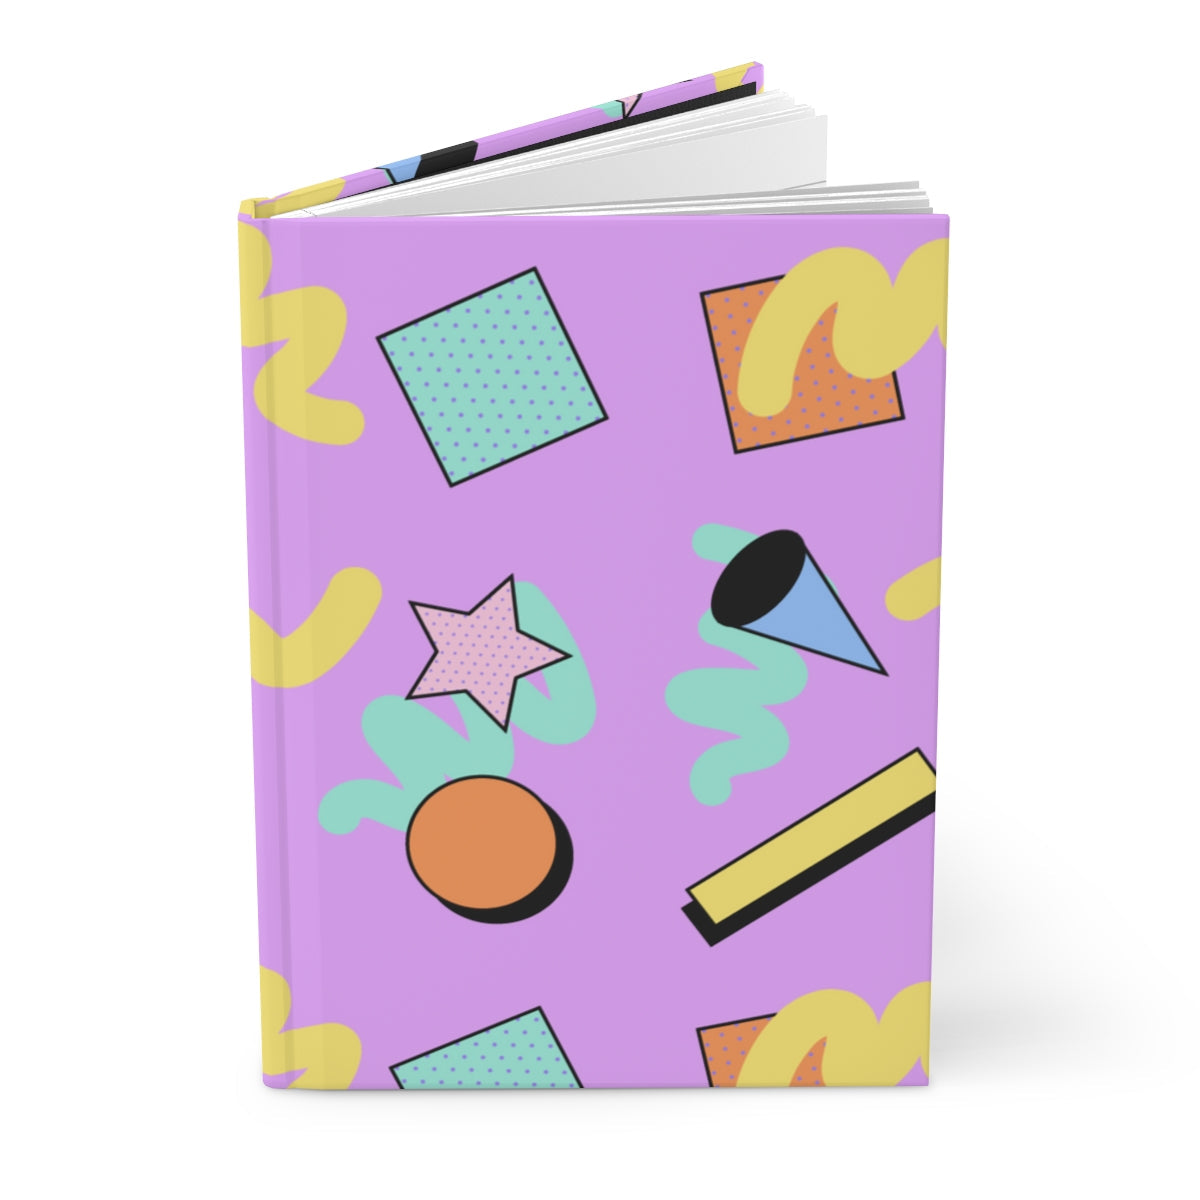 Little Doodles Hardcover Matte Journal Paper products Pink Sweetheart